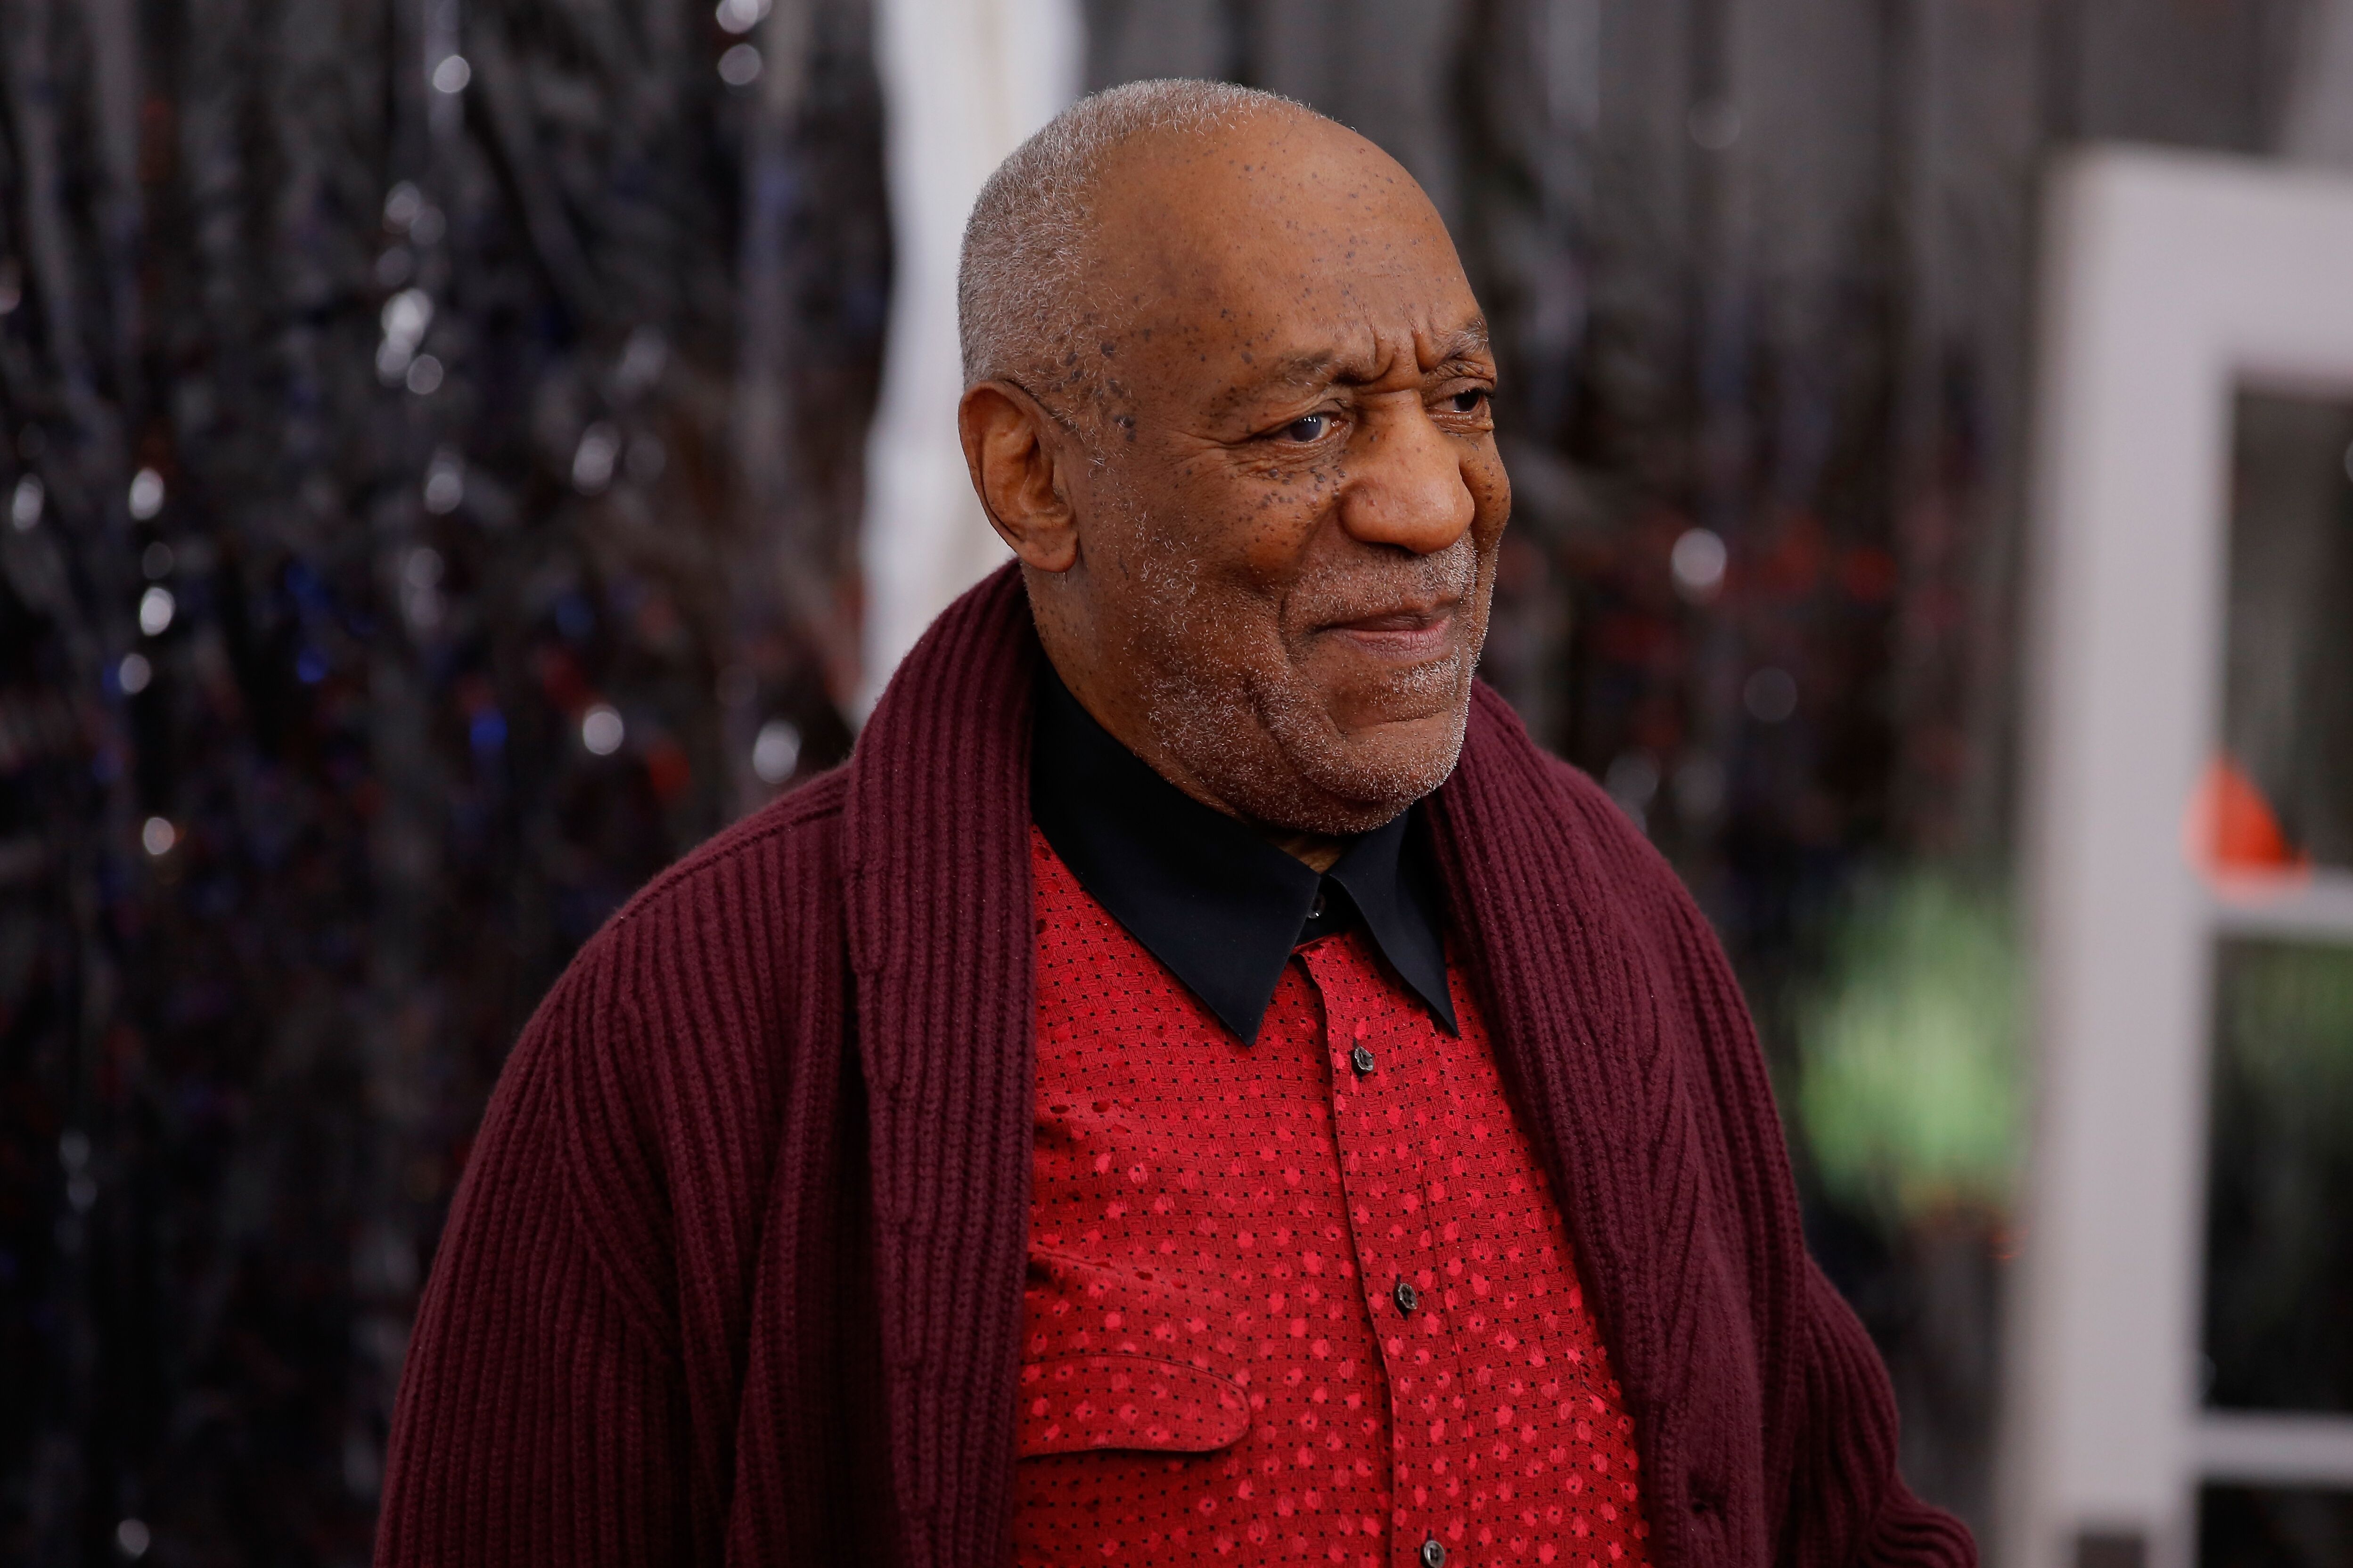 Bill Cosby attends the 7th annual "Stand Up For Heroes" event at Madison Square Garden on November 6, 2013 in New York City | Photo: Getty Images